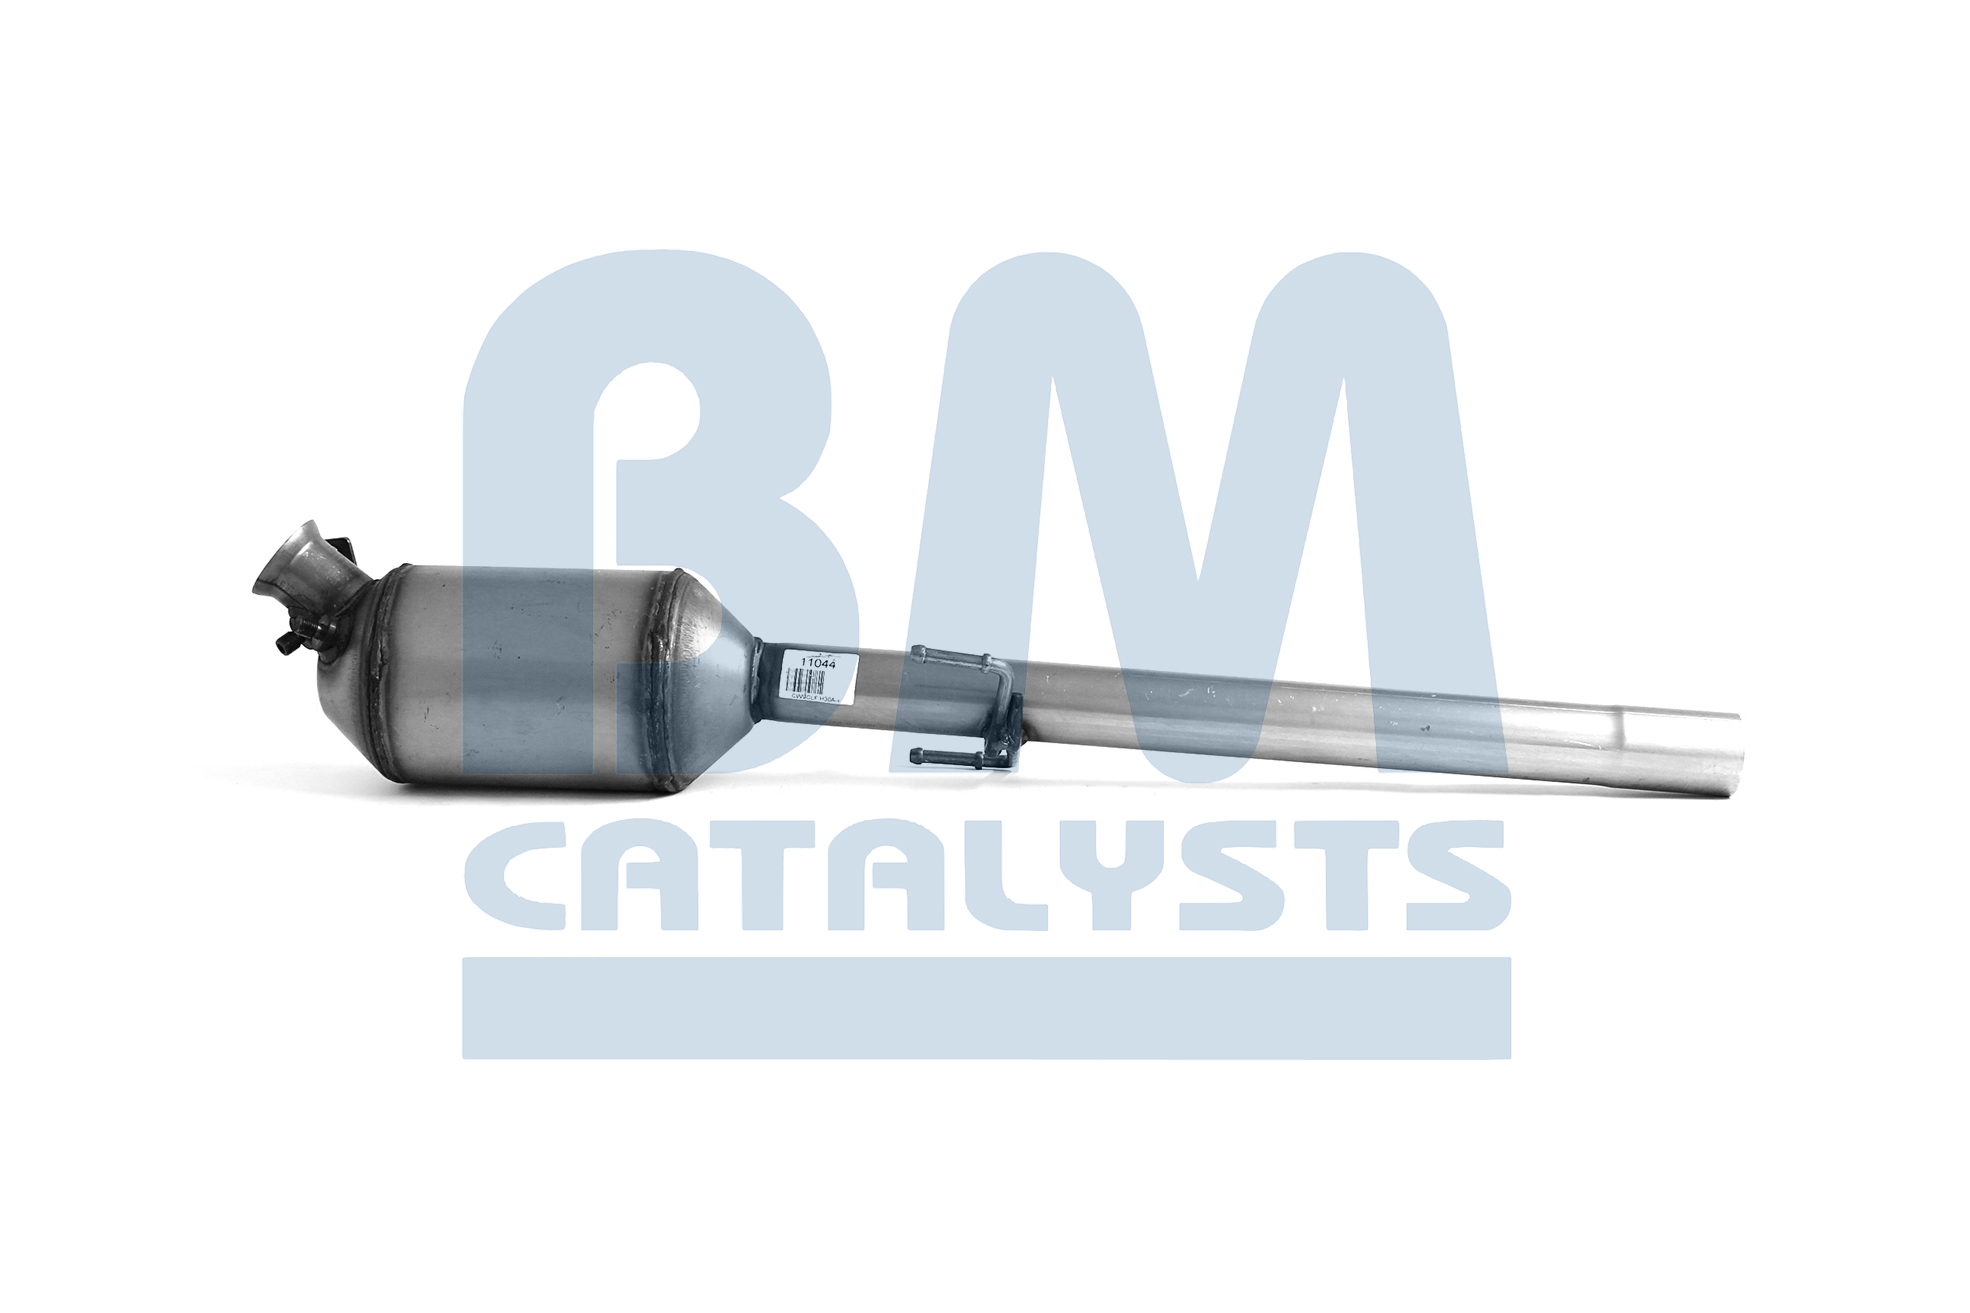 Original BM11044 BM CATALYSTS Diesel particulate filter experience and price